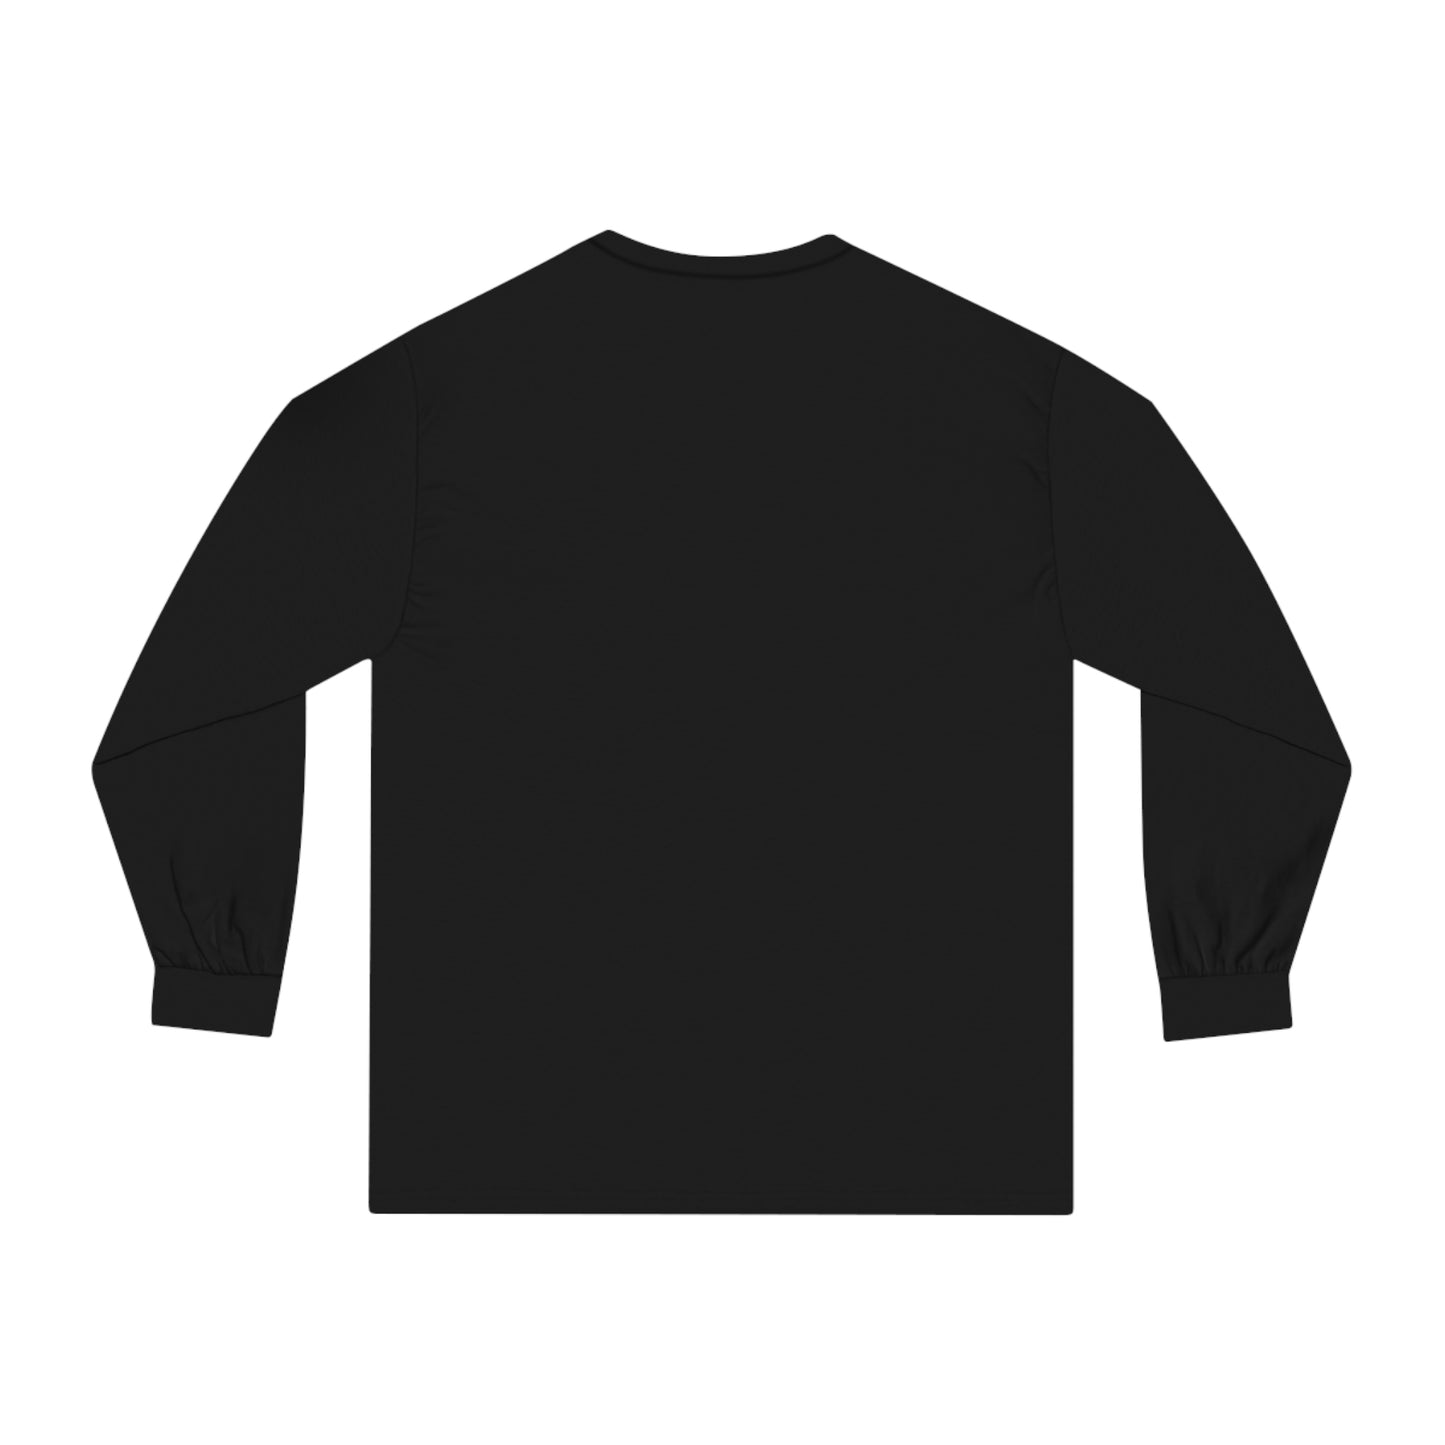 Kasi Currie Classic Long Sleeve T-Shirt